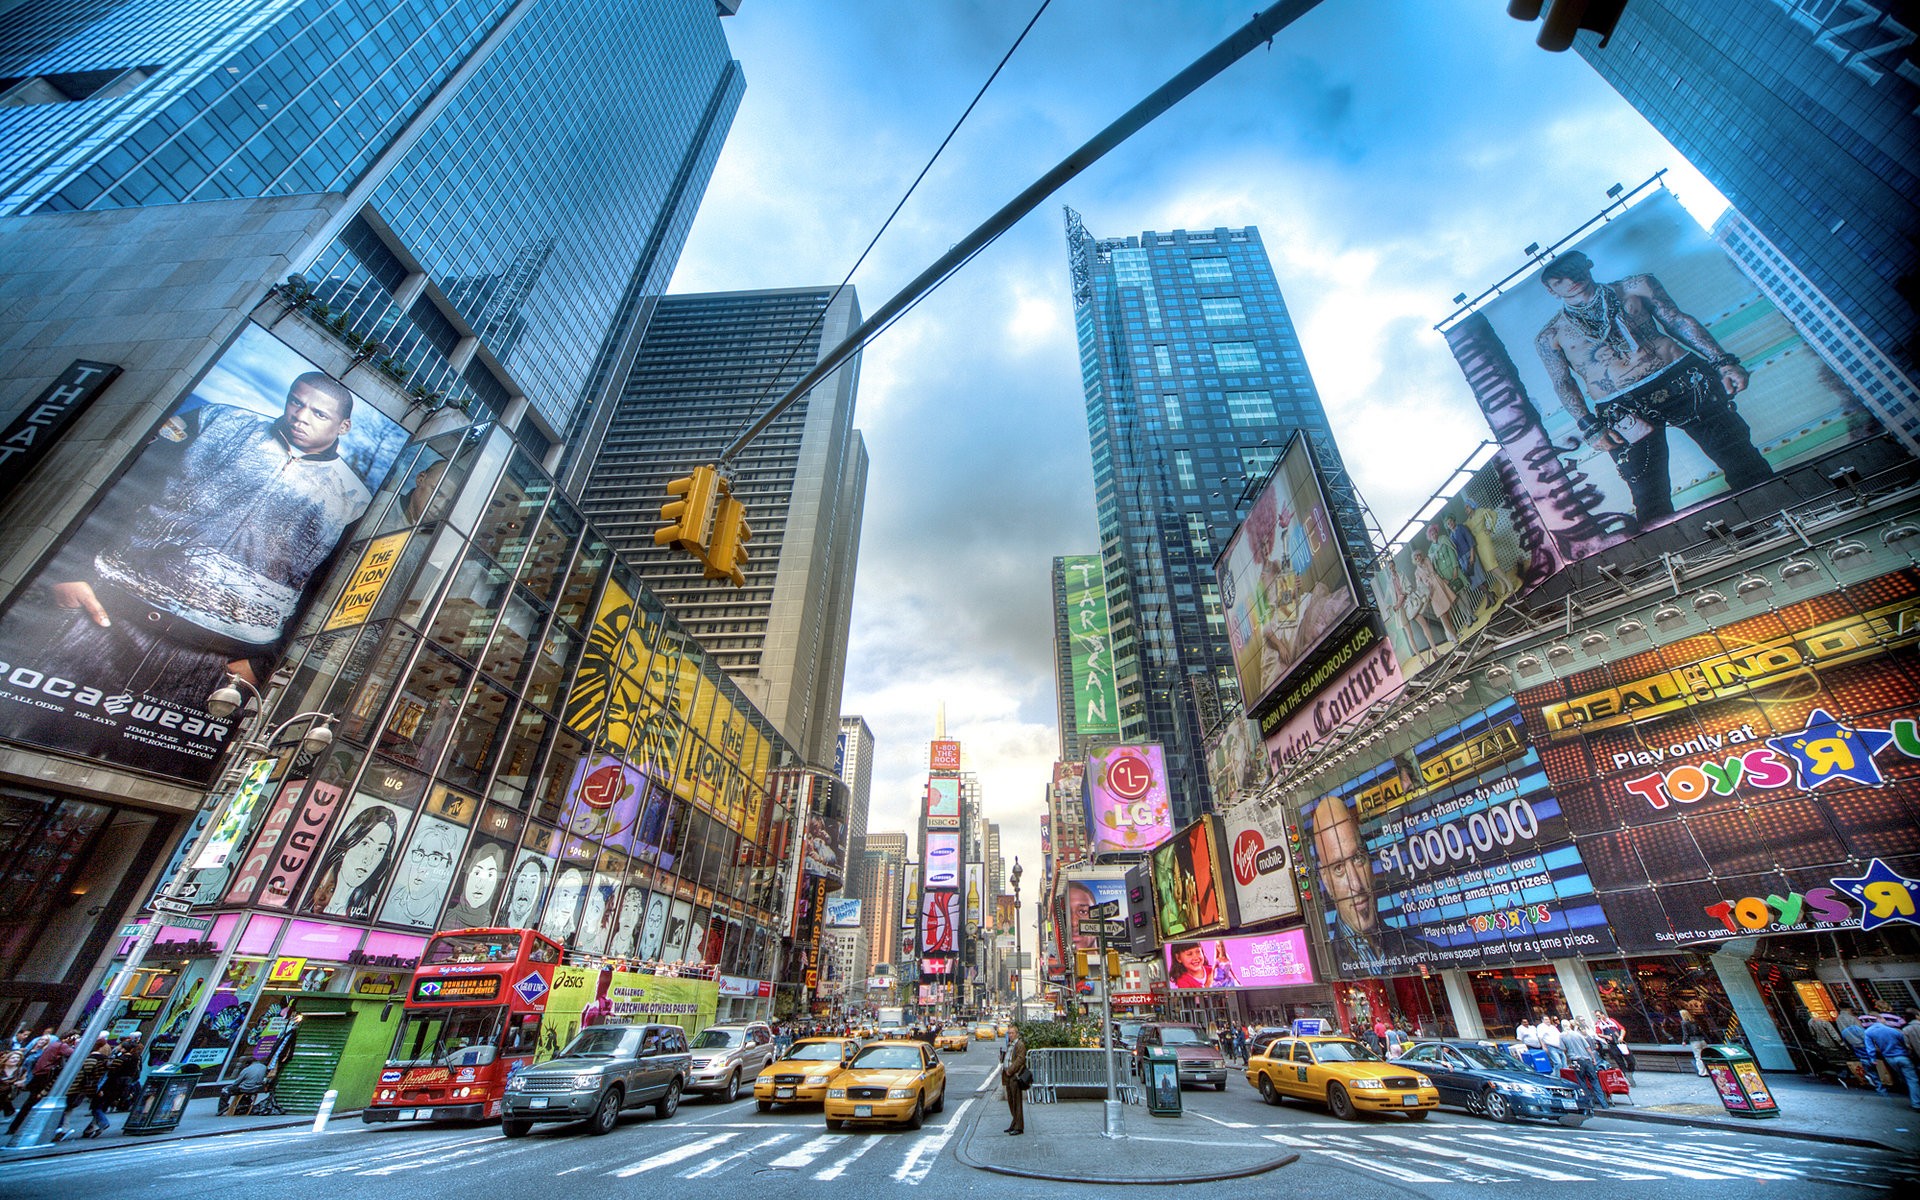 Times Square New York: The Most Famous Entertainment Centers in The ...